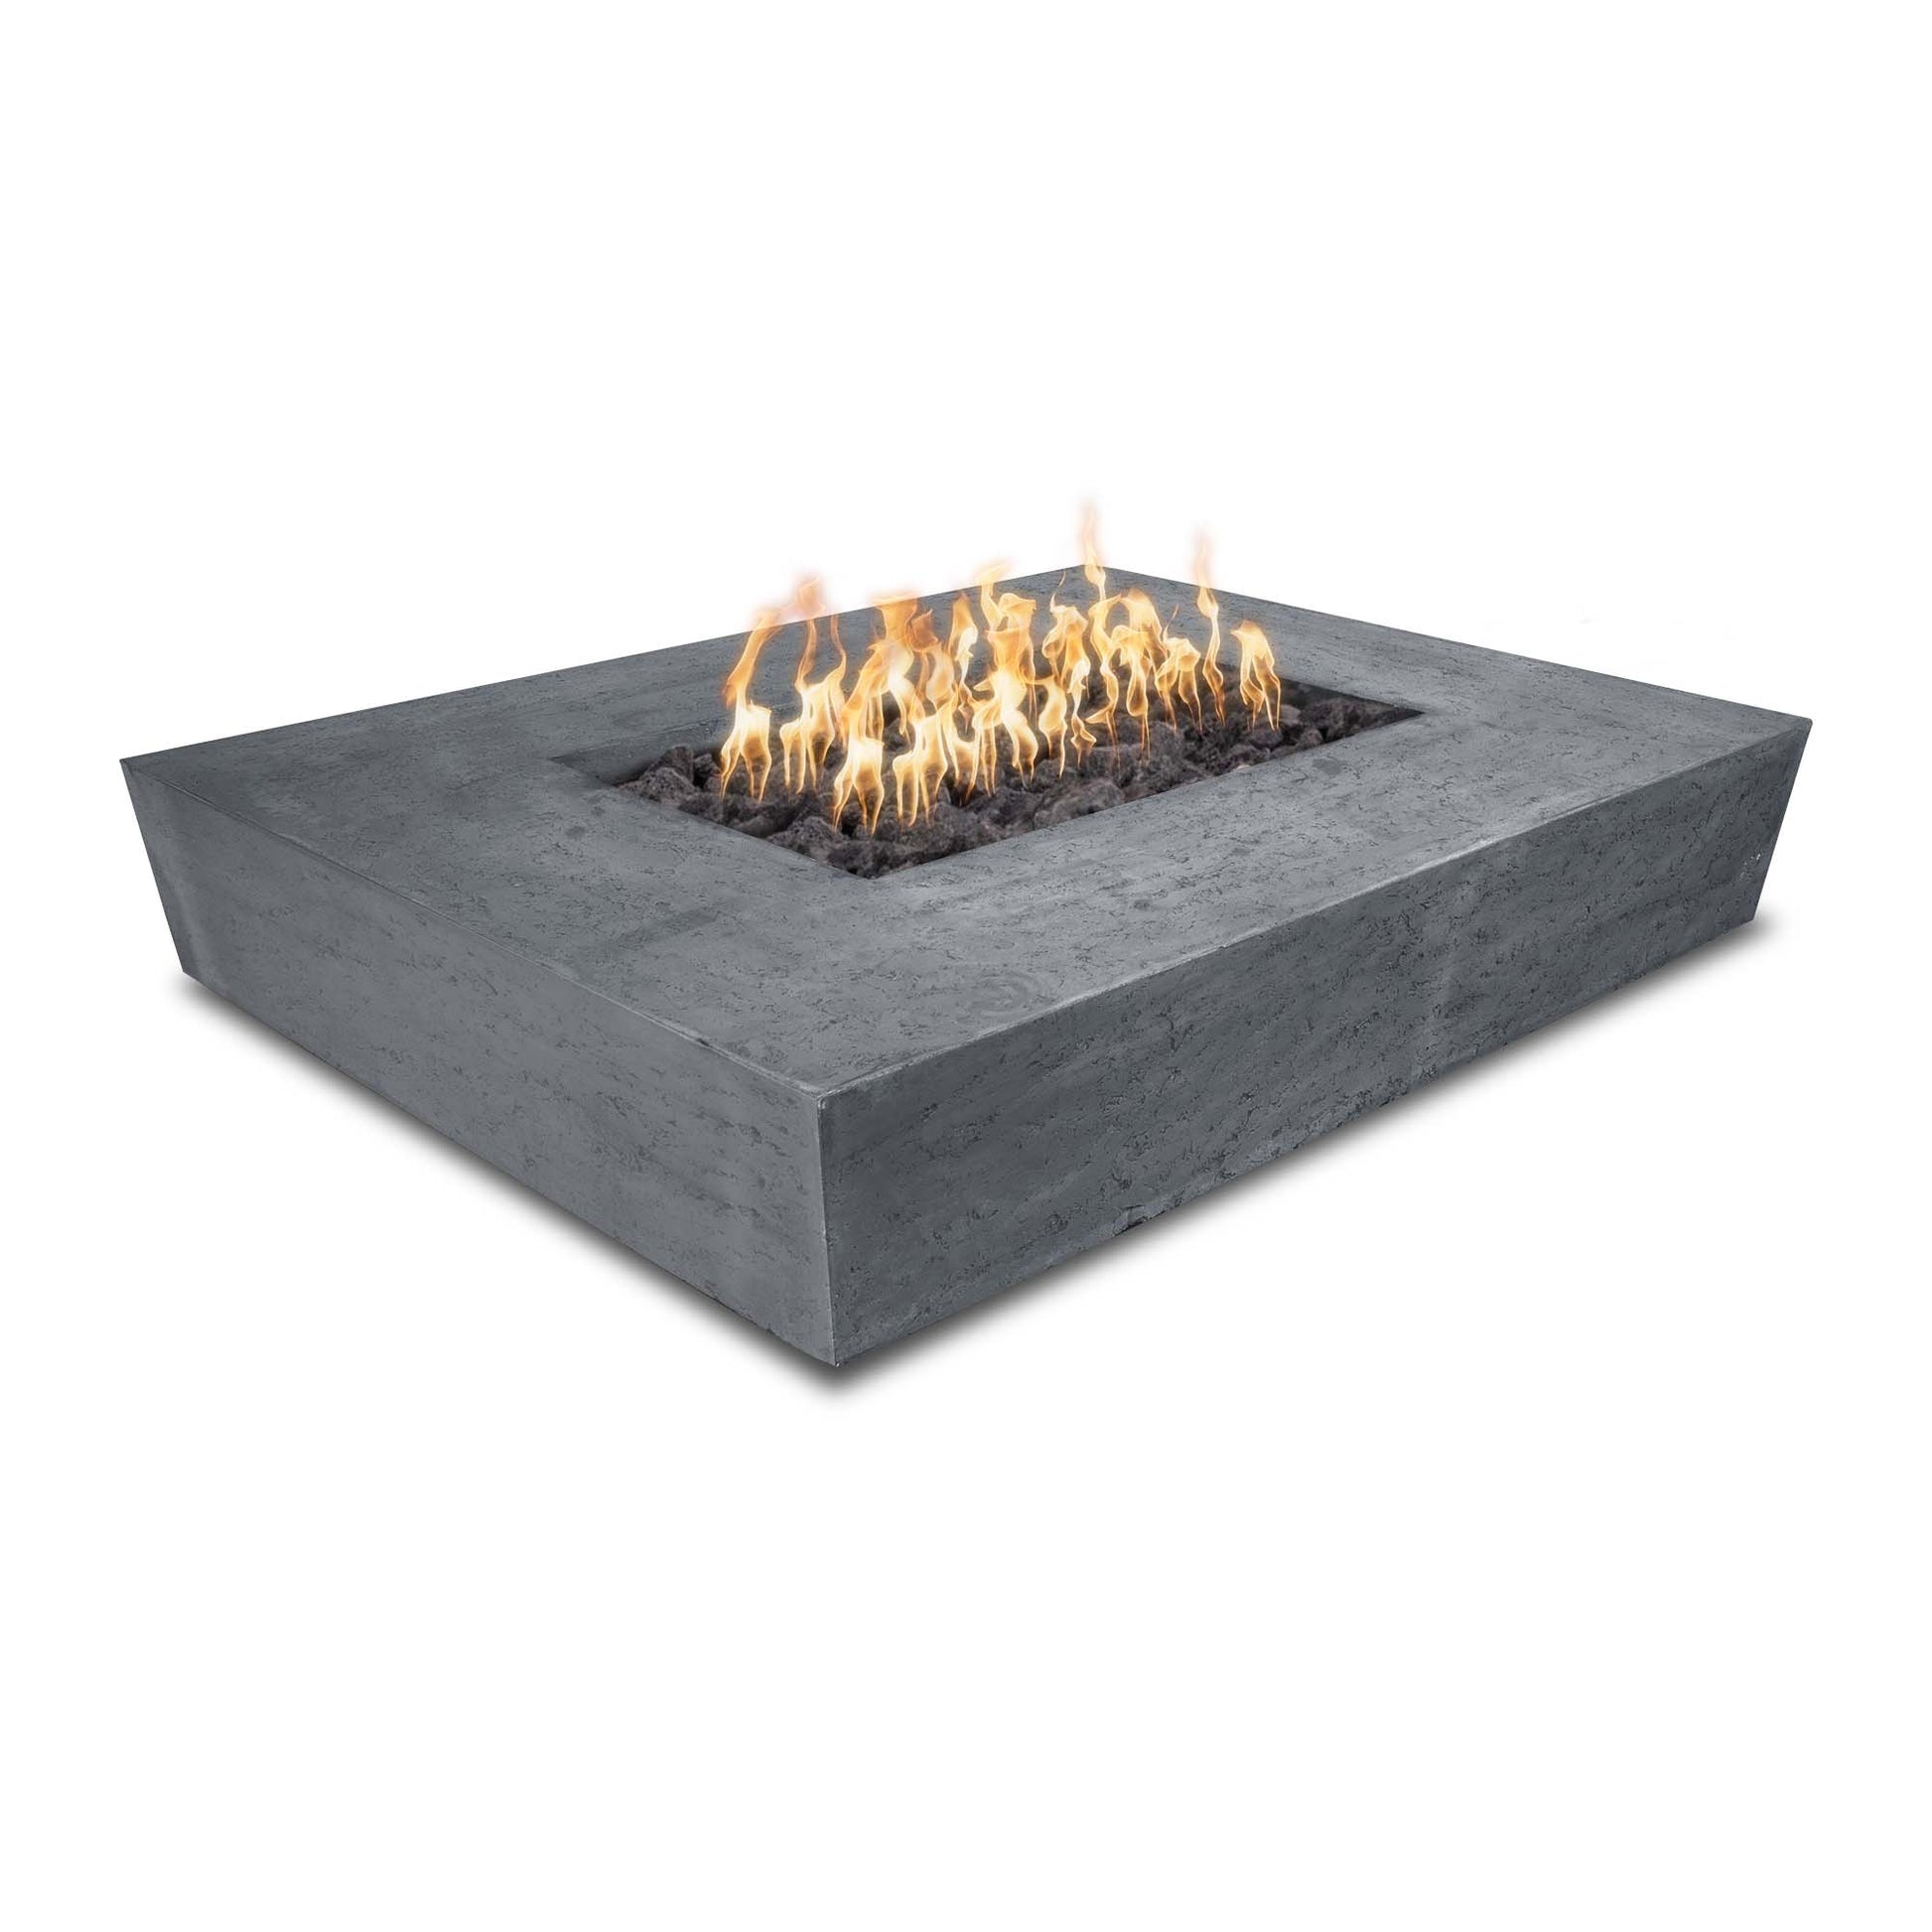 The Outdoor Plus Rectangular Heiko 58" Rustic Moss Stone GFRC Concrete Liquid Propane Fire Pit with Flame Sense with Spark Ignition